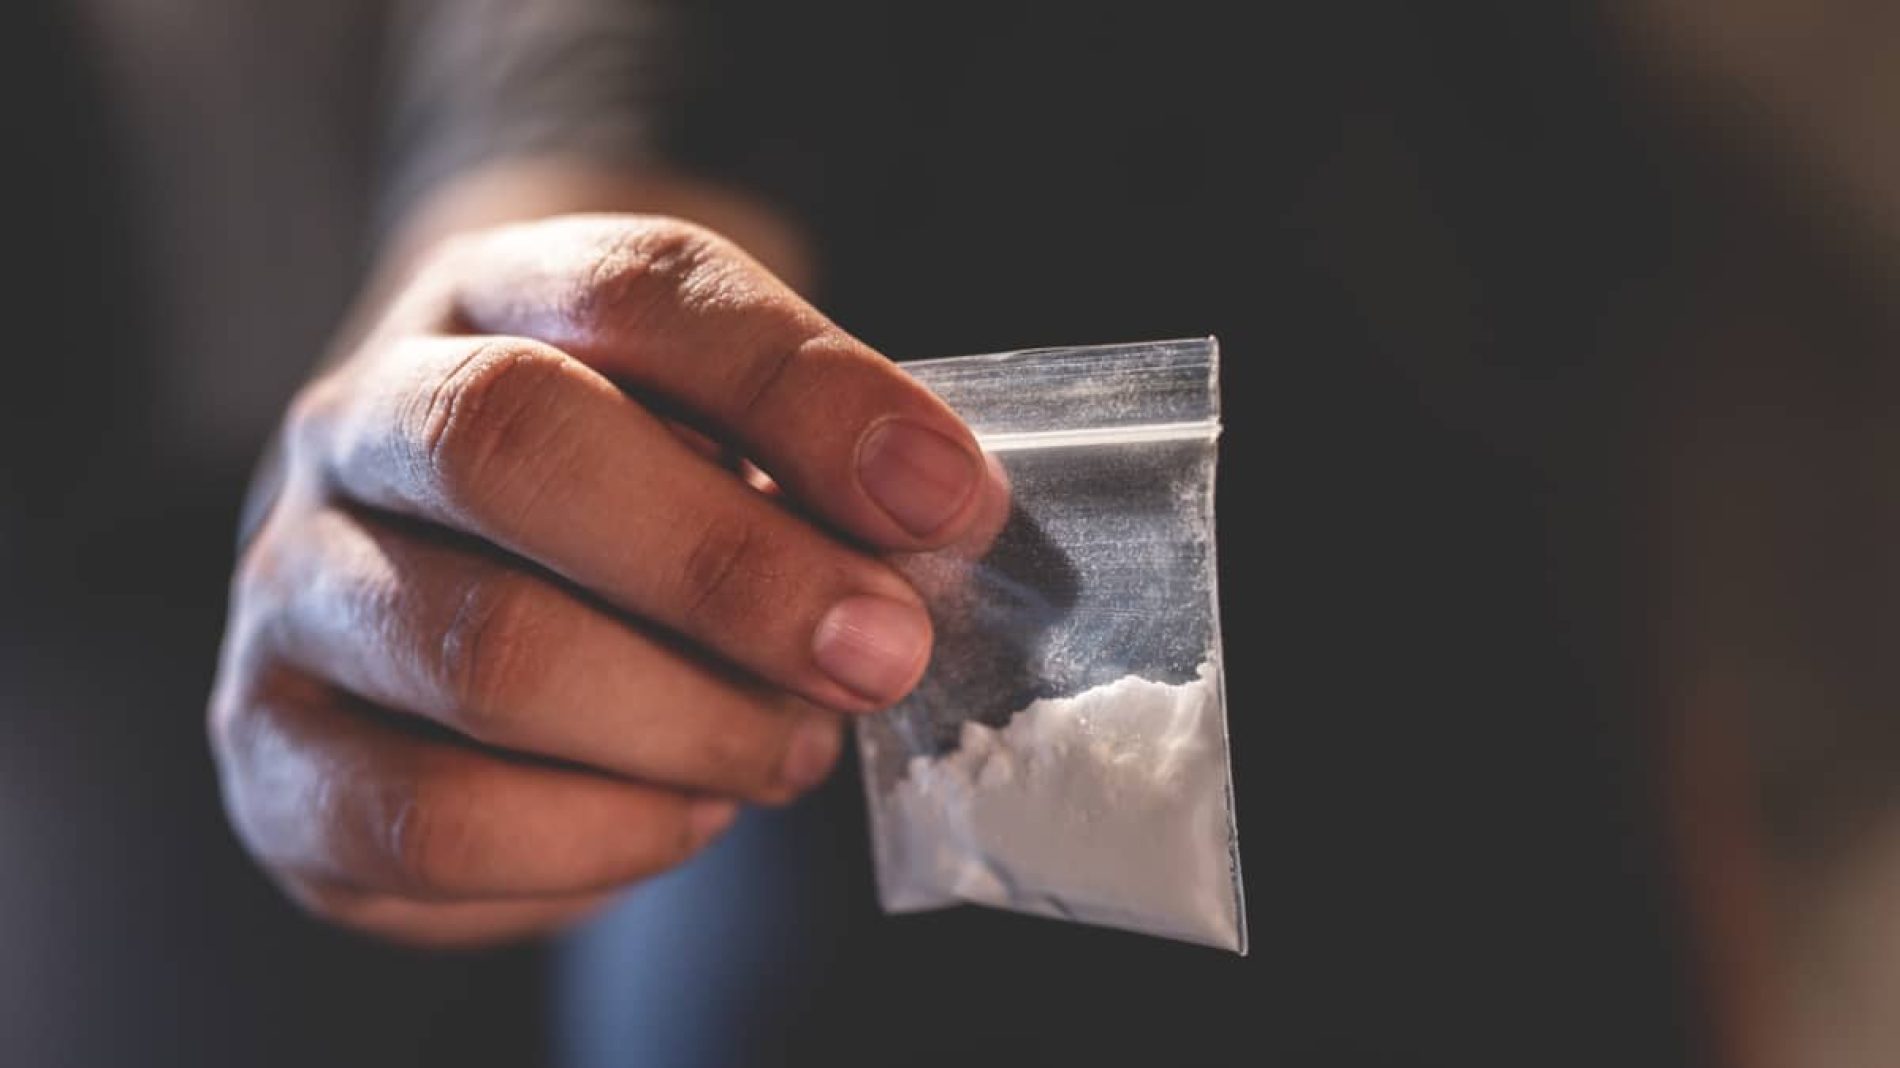 a bag of cocaine being held in someone's right hand